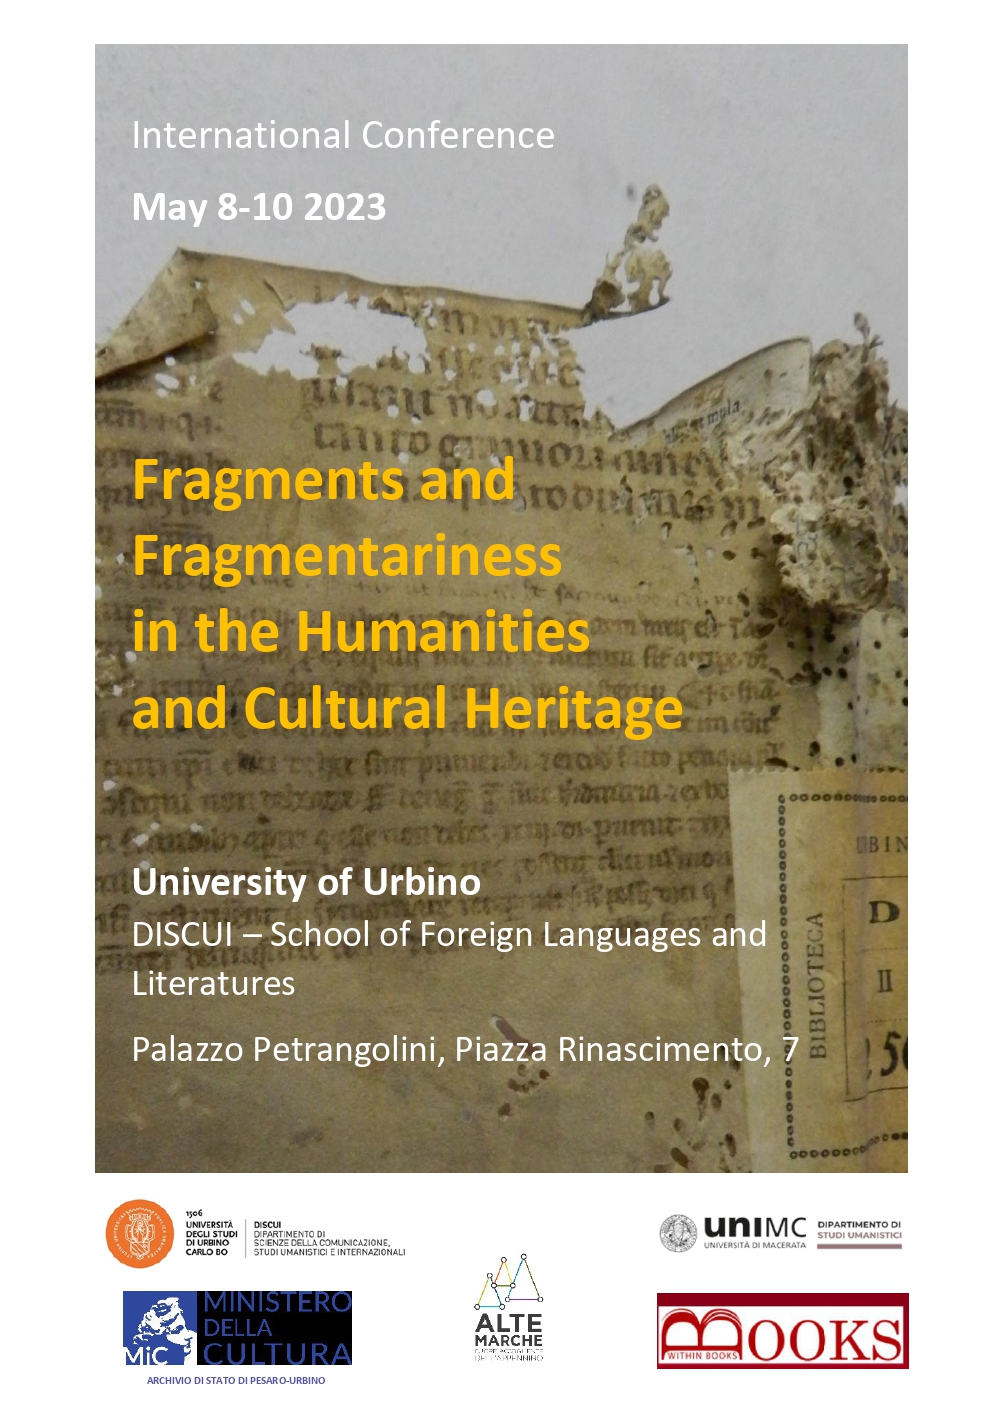 Tagung Fragments and Fragmentariness in the Humanities and Cultural Heritage, Urbino 8-10.5.2023